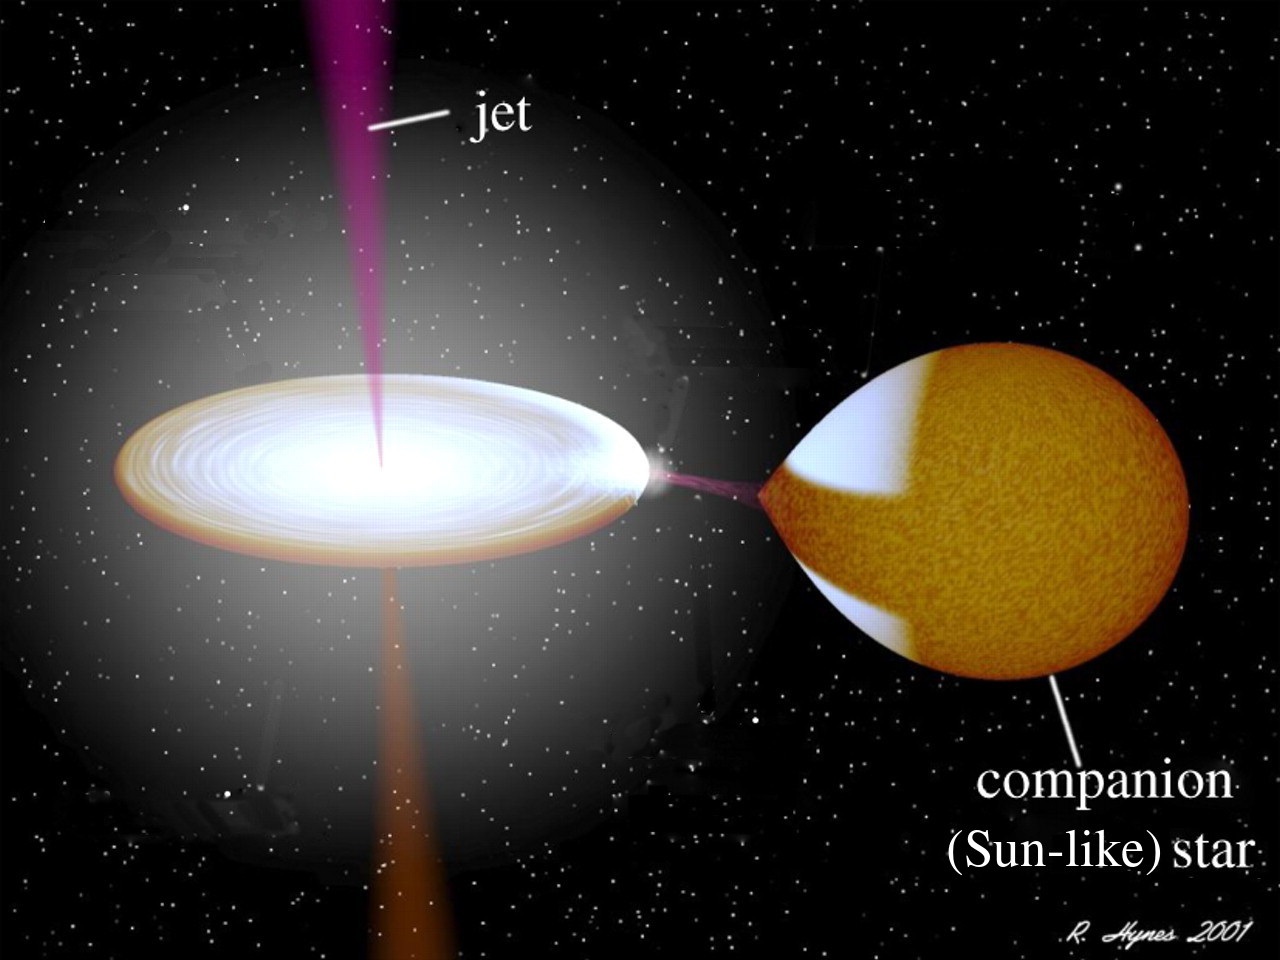 White dwarf star discovered emitting rapid gas flares for the first time